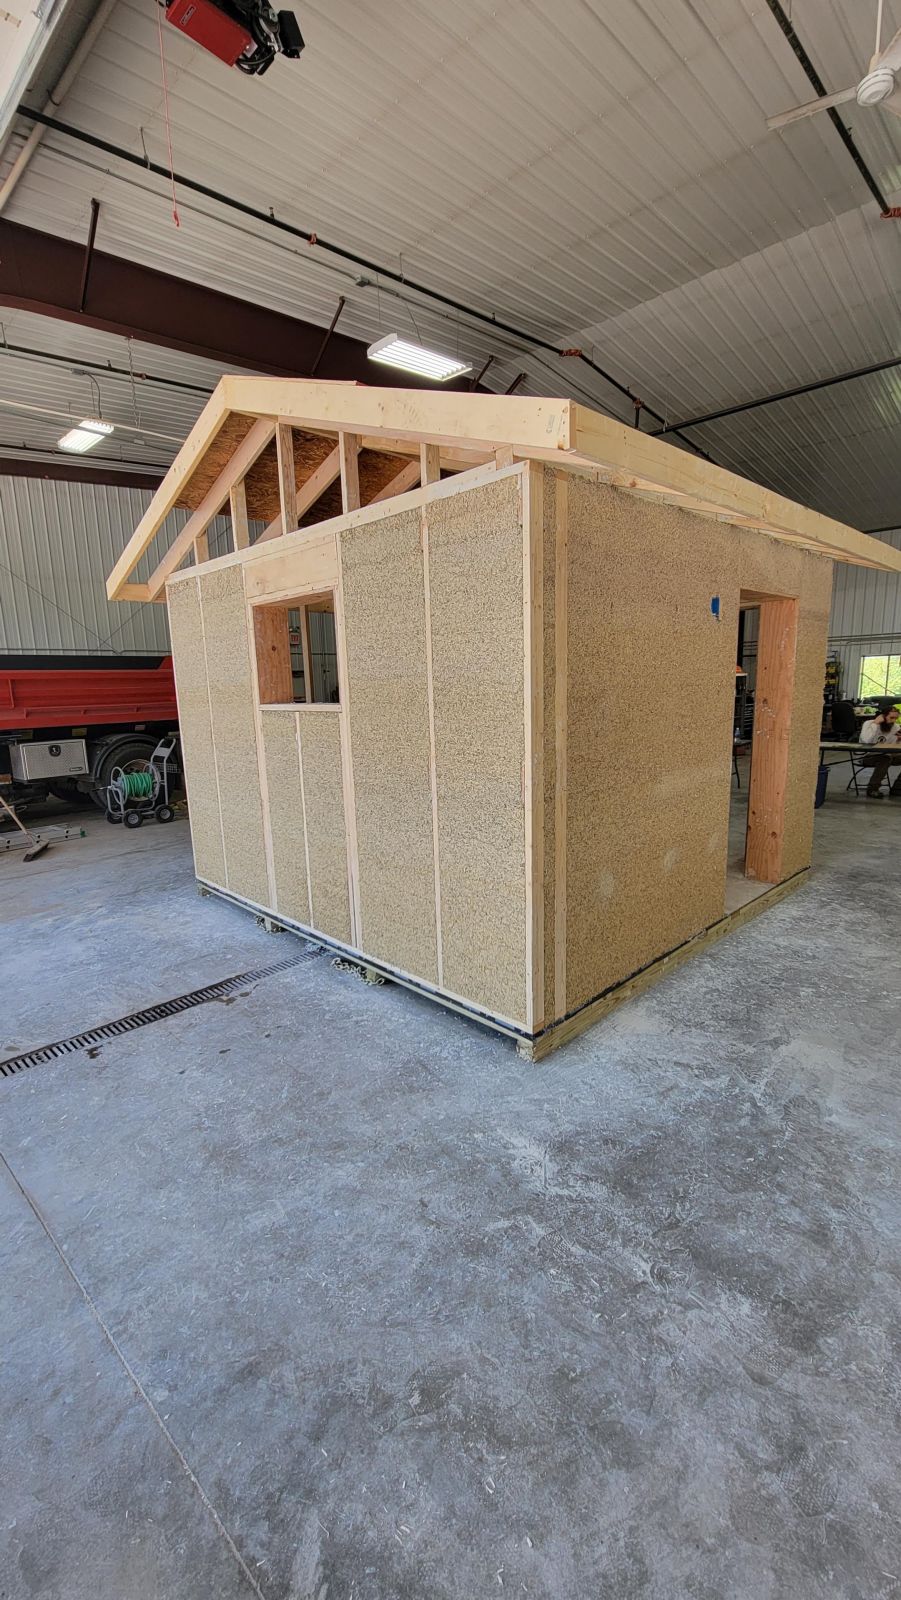 Lower sioux indian community uses hempcrete to build low-cost, sustainable housing Article Photo